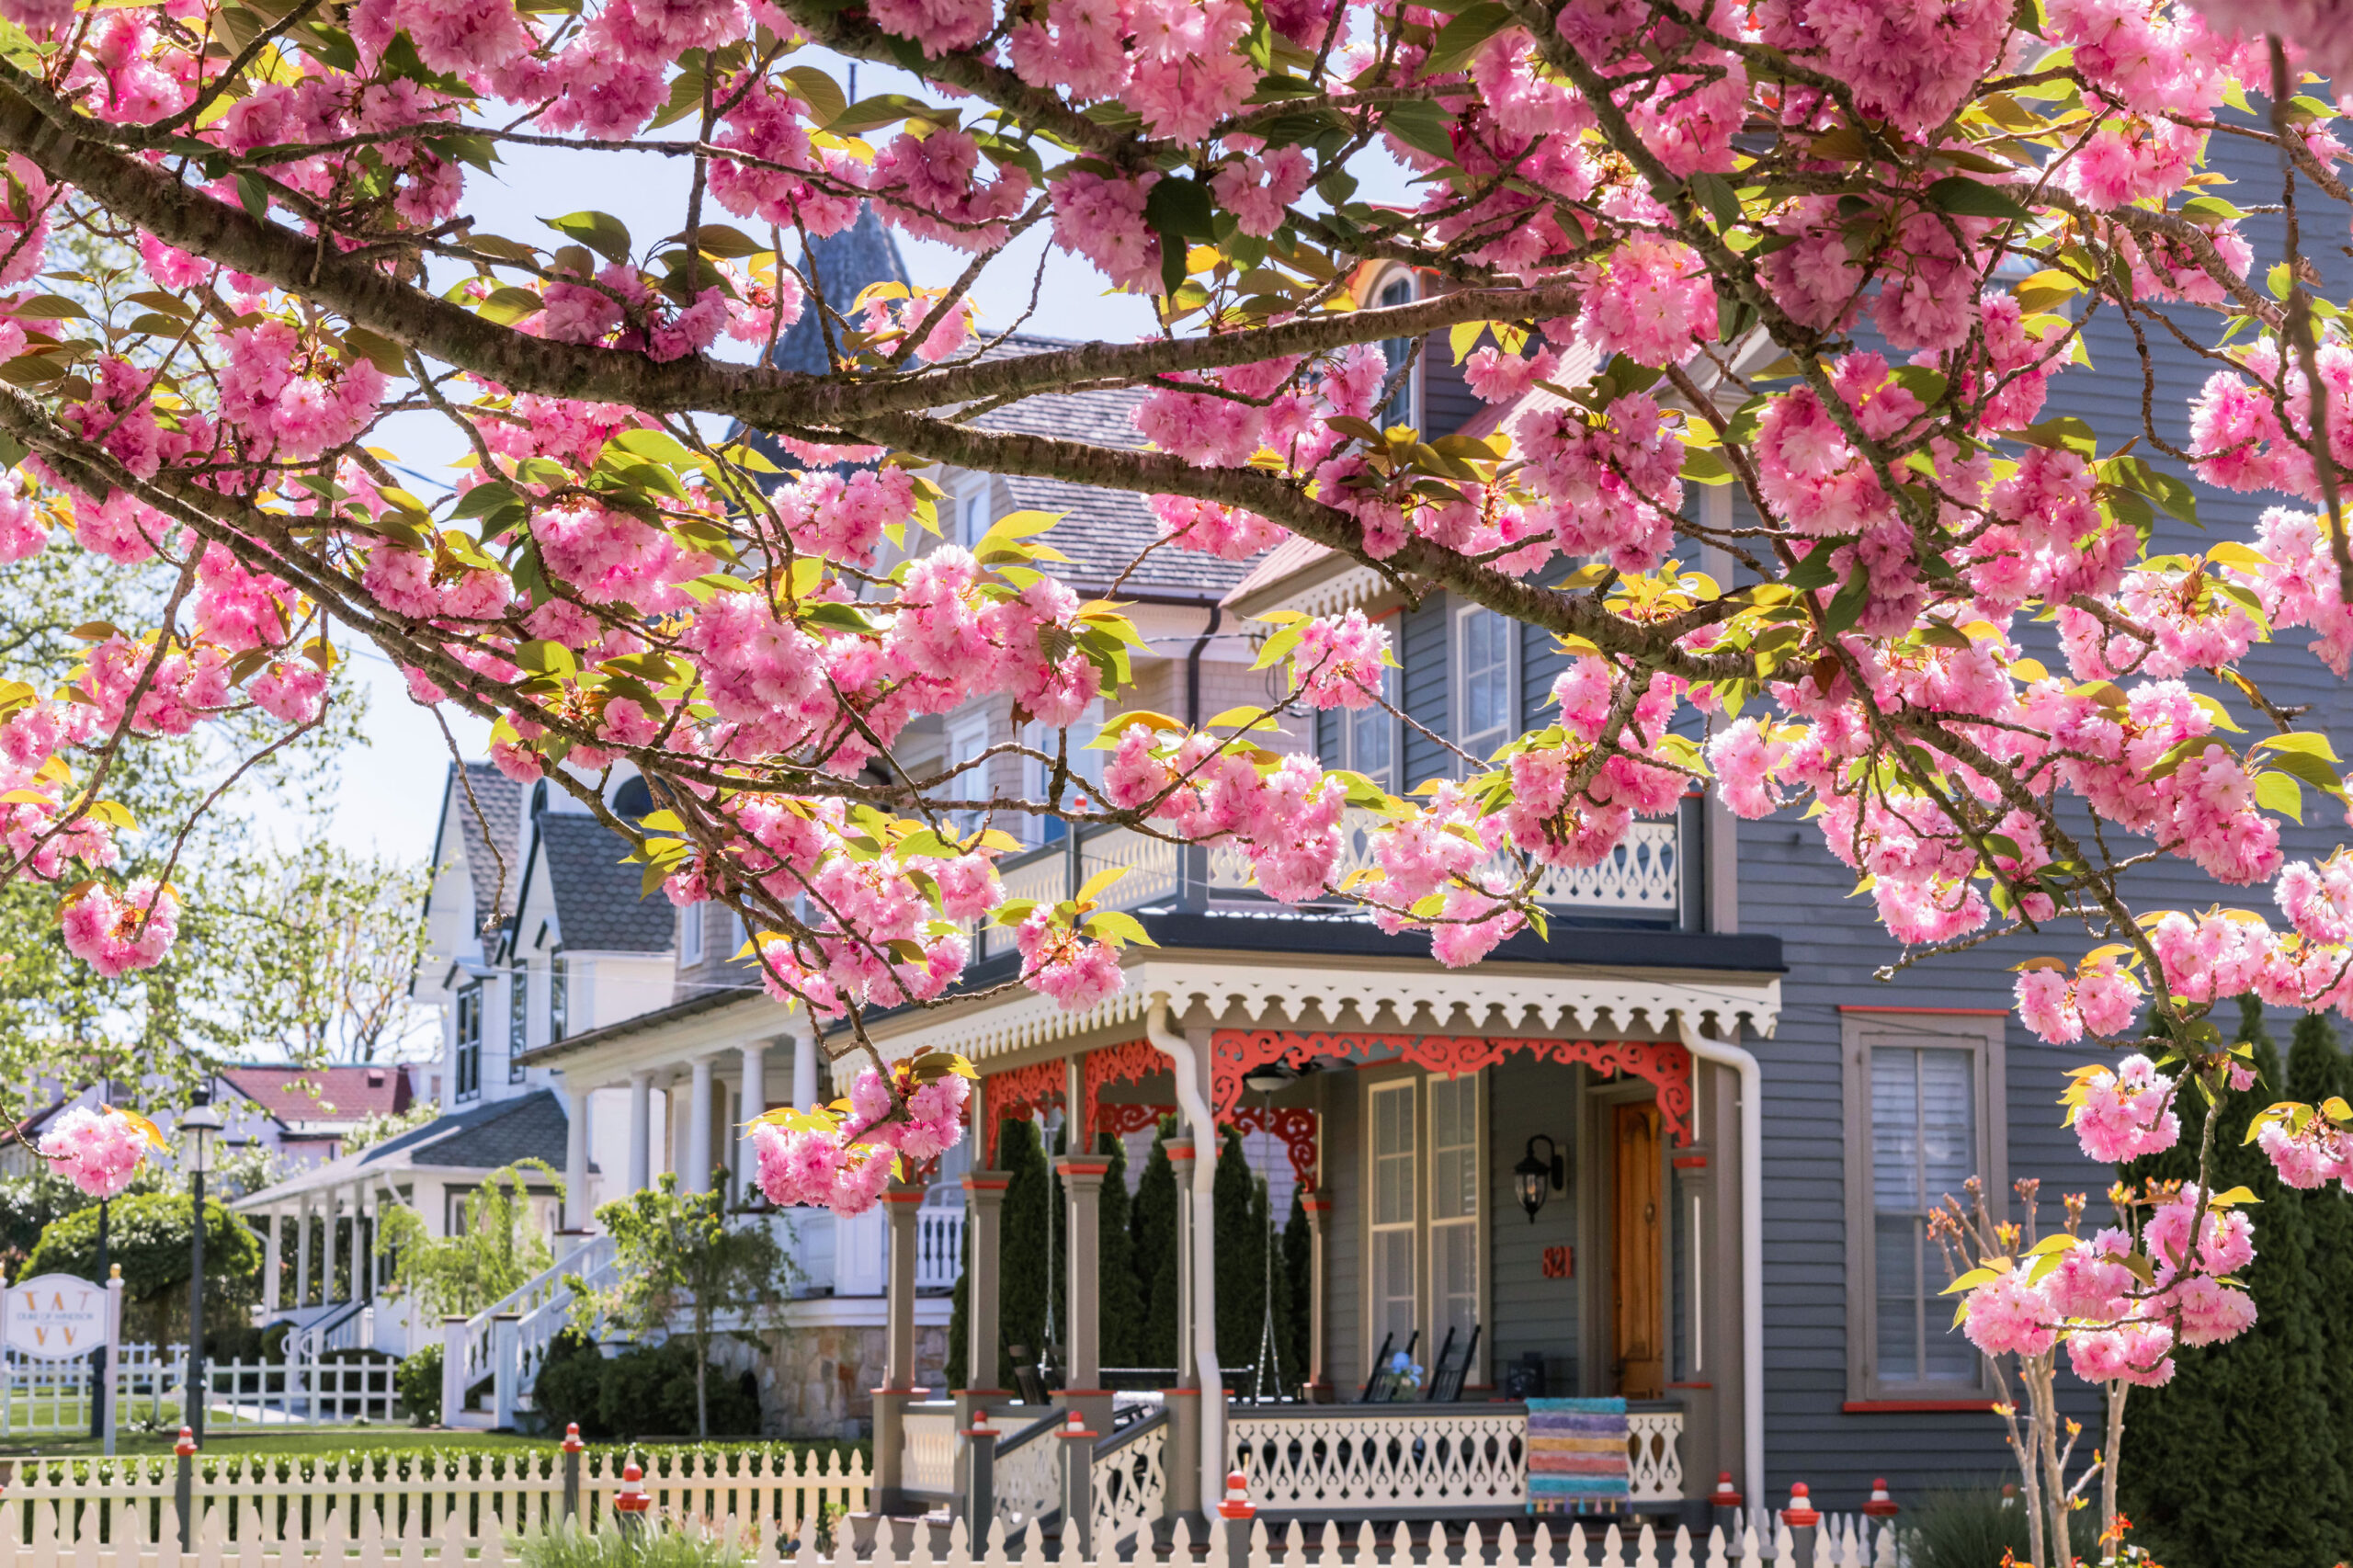 Pink cherry blossoms in front of porches and Victorian style homes on a bright sunny day.